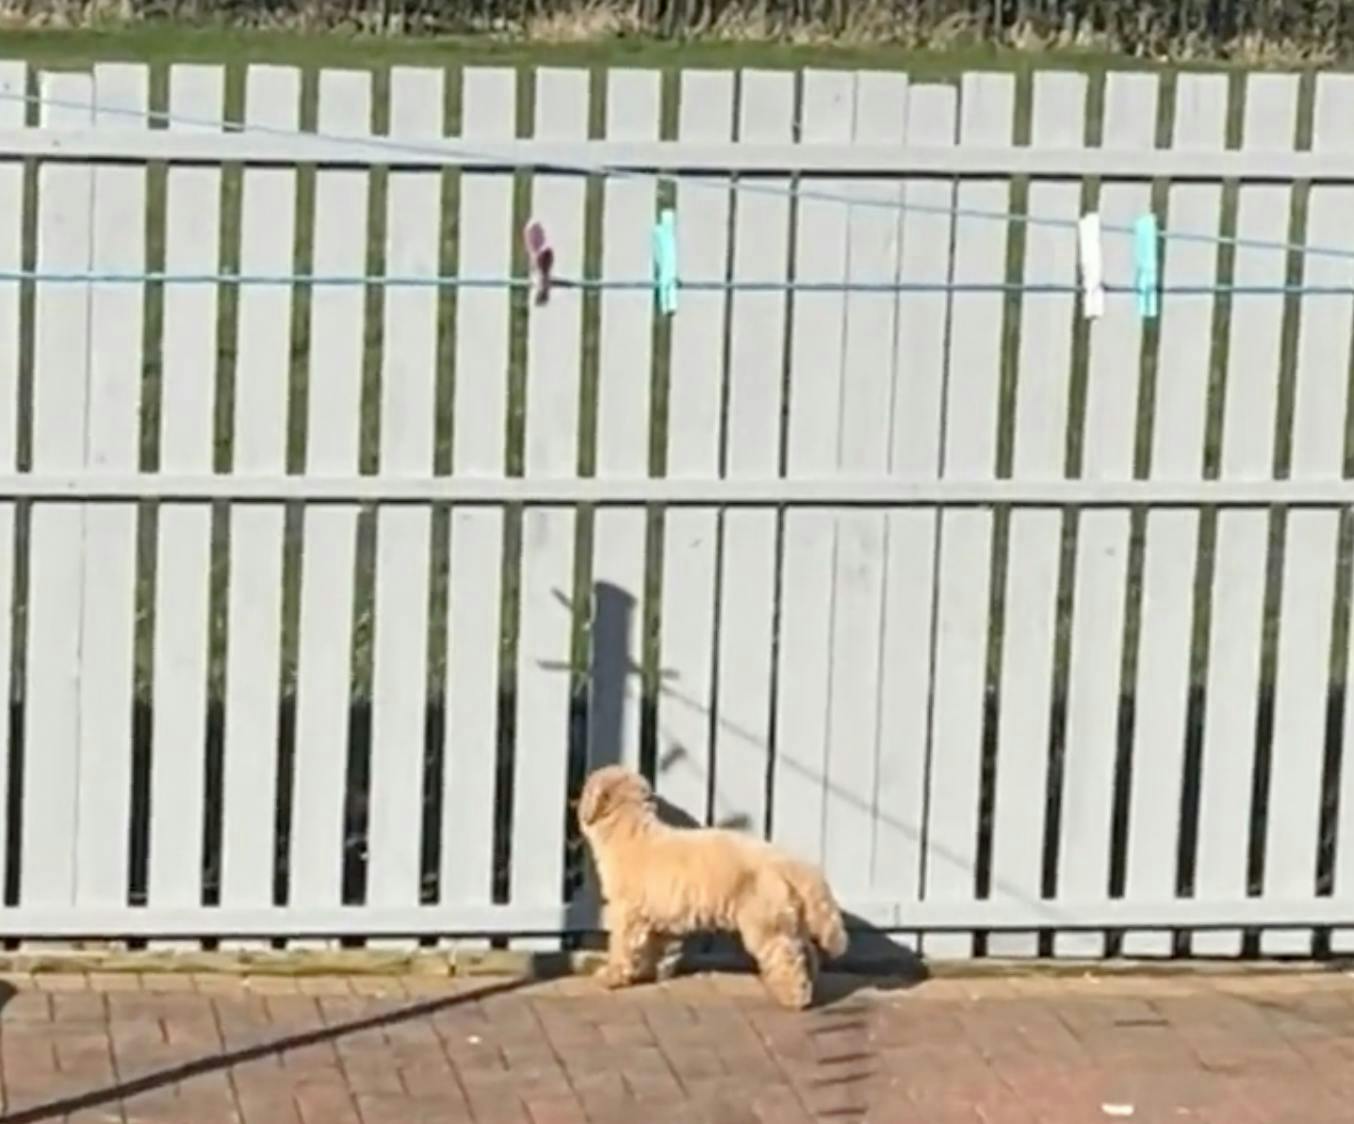 Harry the dog looking through the fence